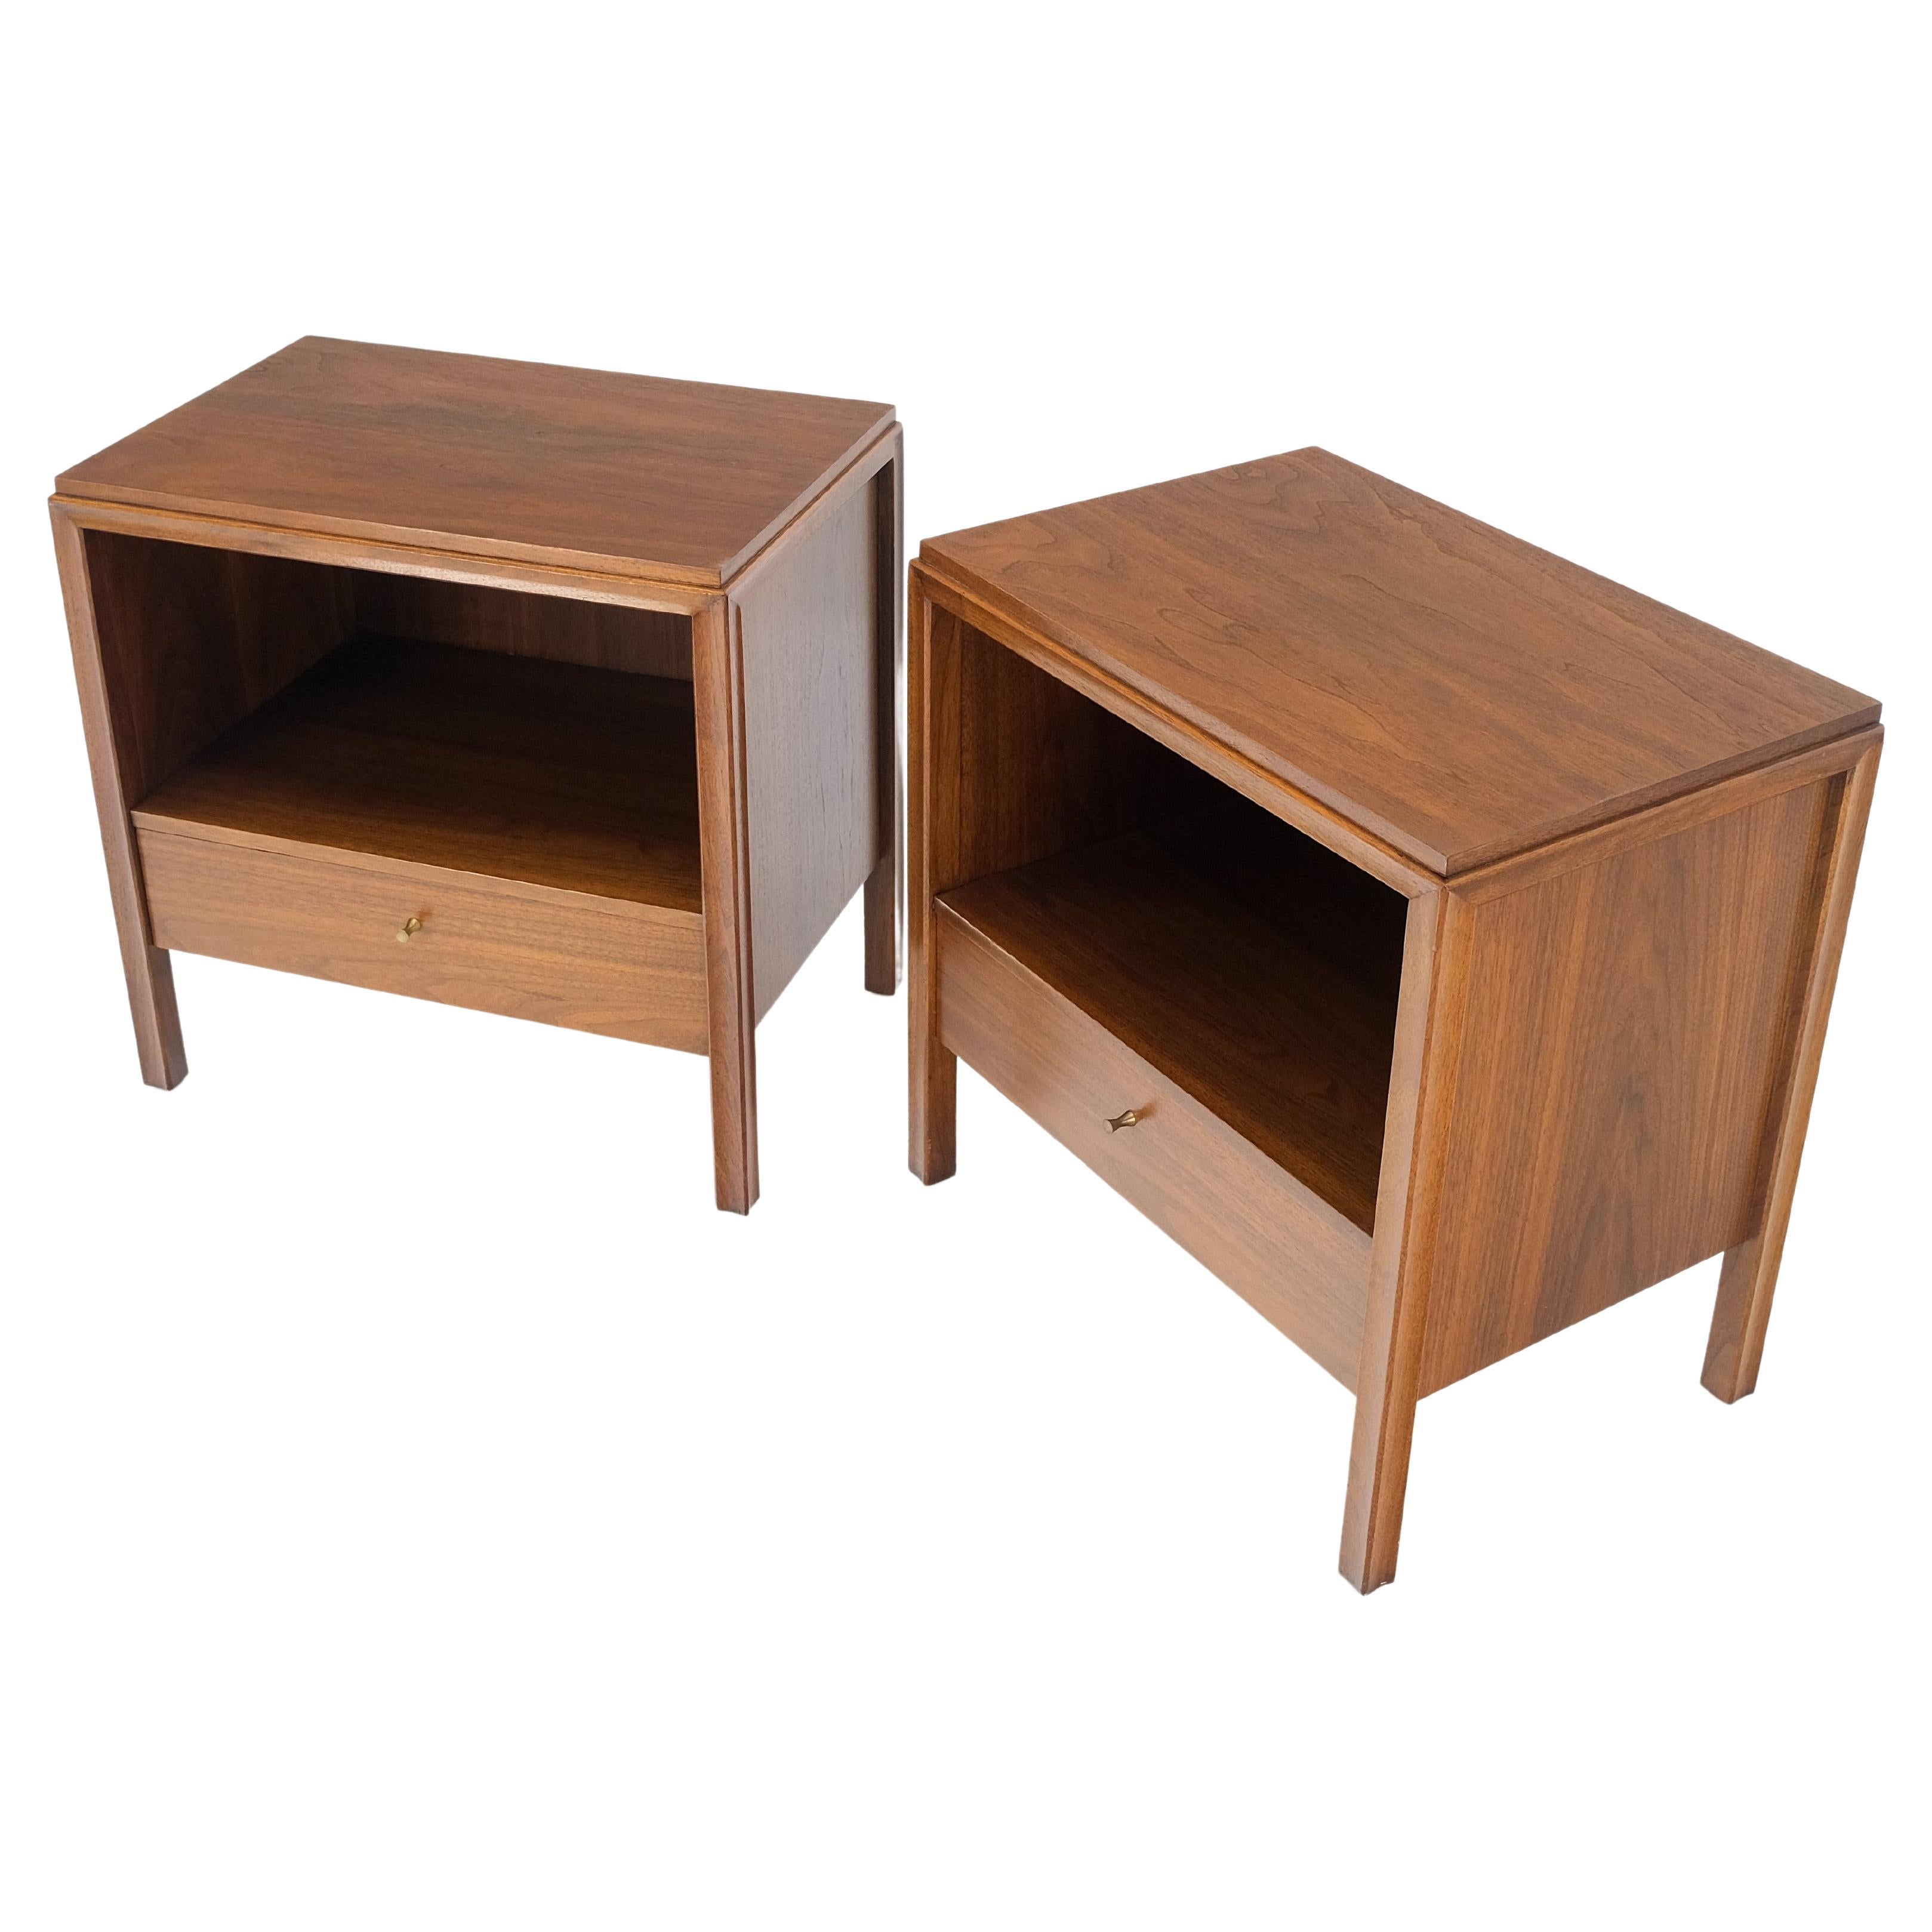 Mount Airy Furniture Company End Tables